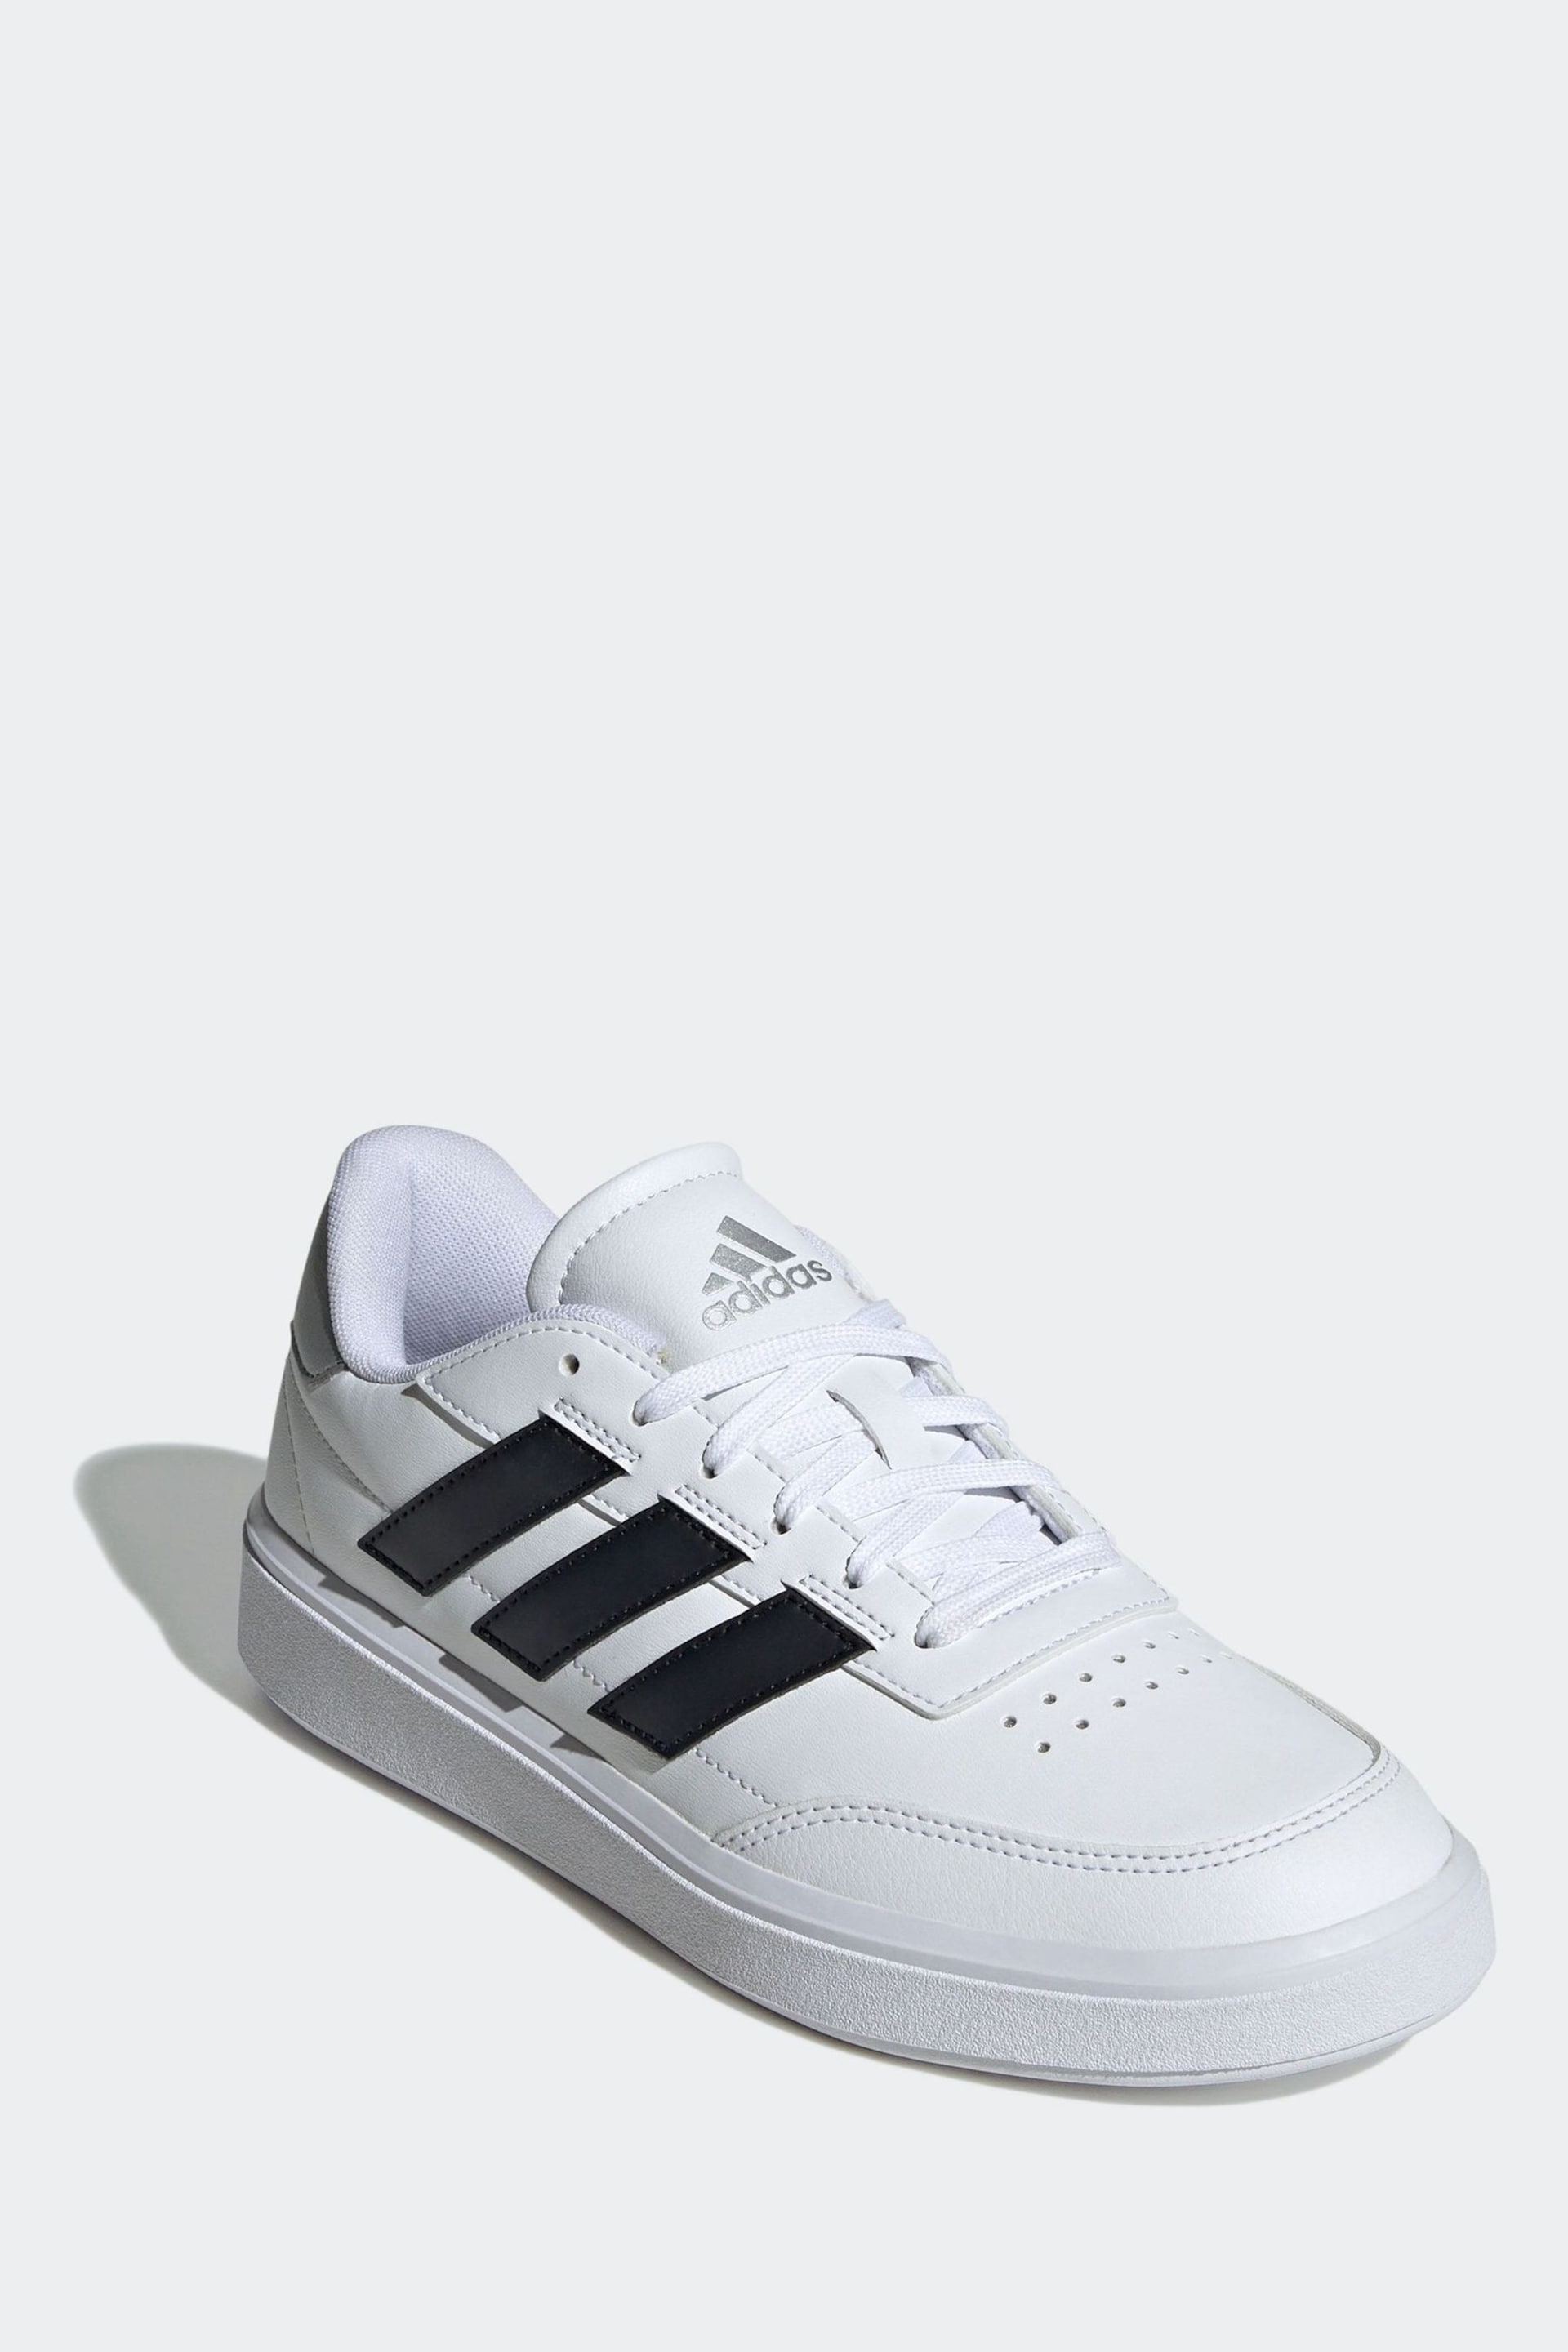 adidas White Court Block Trainers - Image 3 of 9